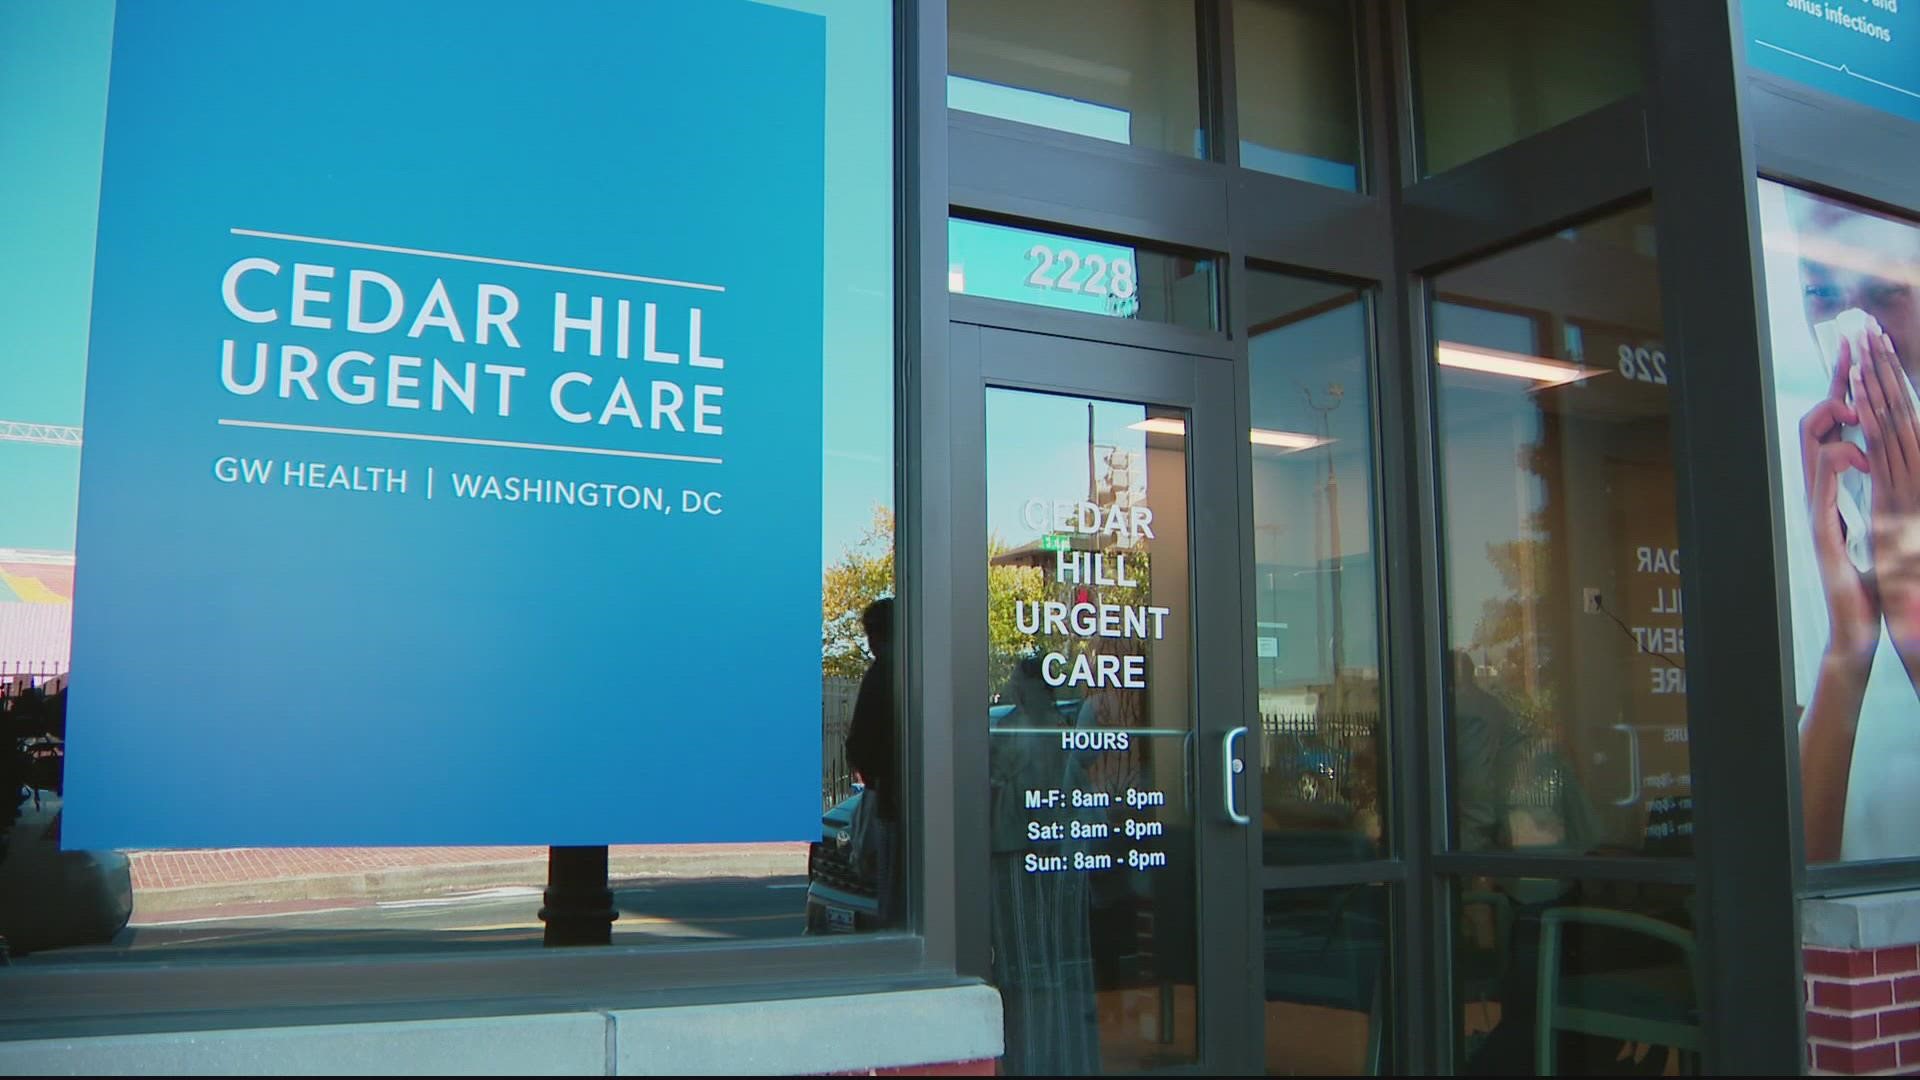 A new urgent care center opens east of the river in D.C. on Oct. 10.